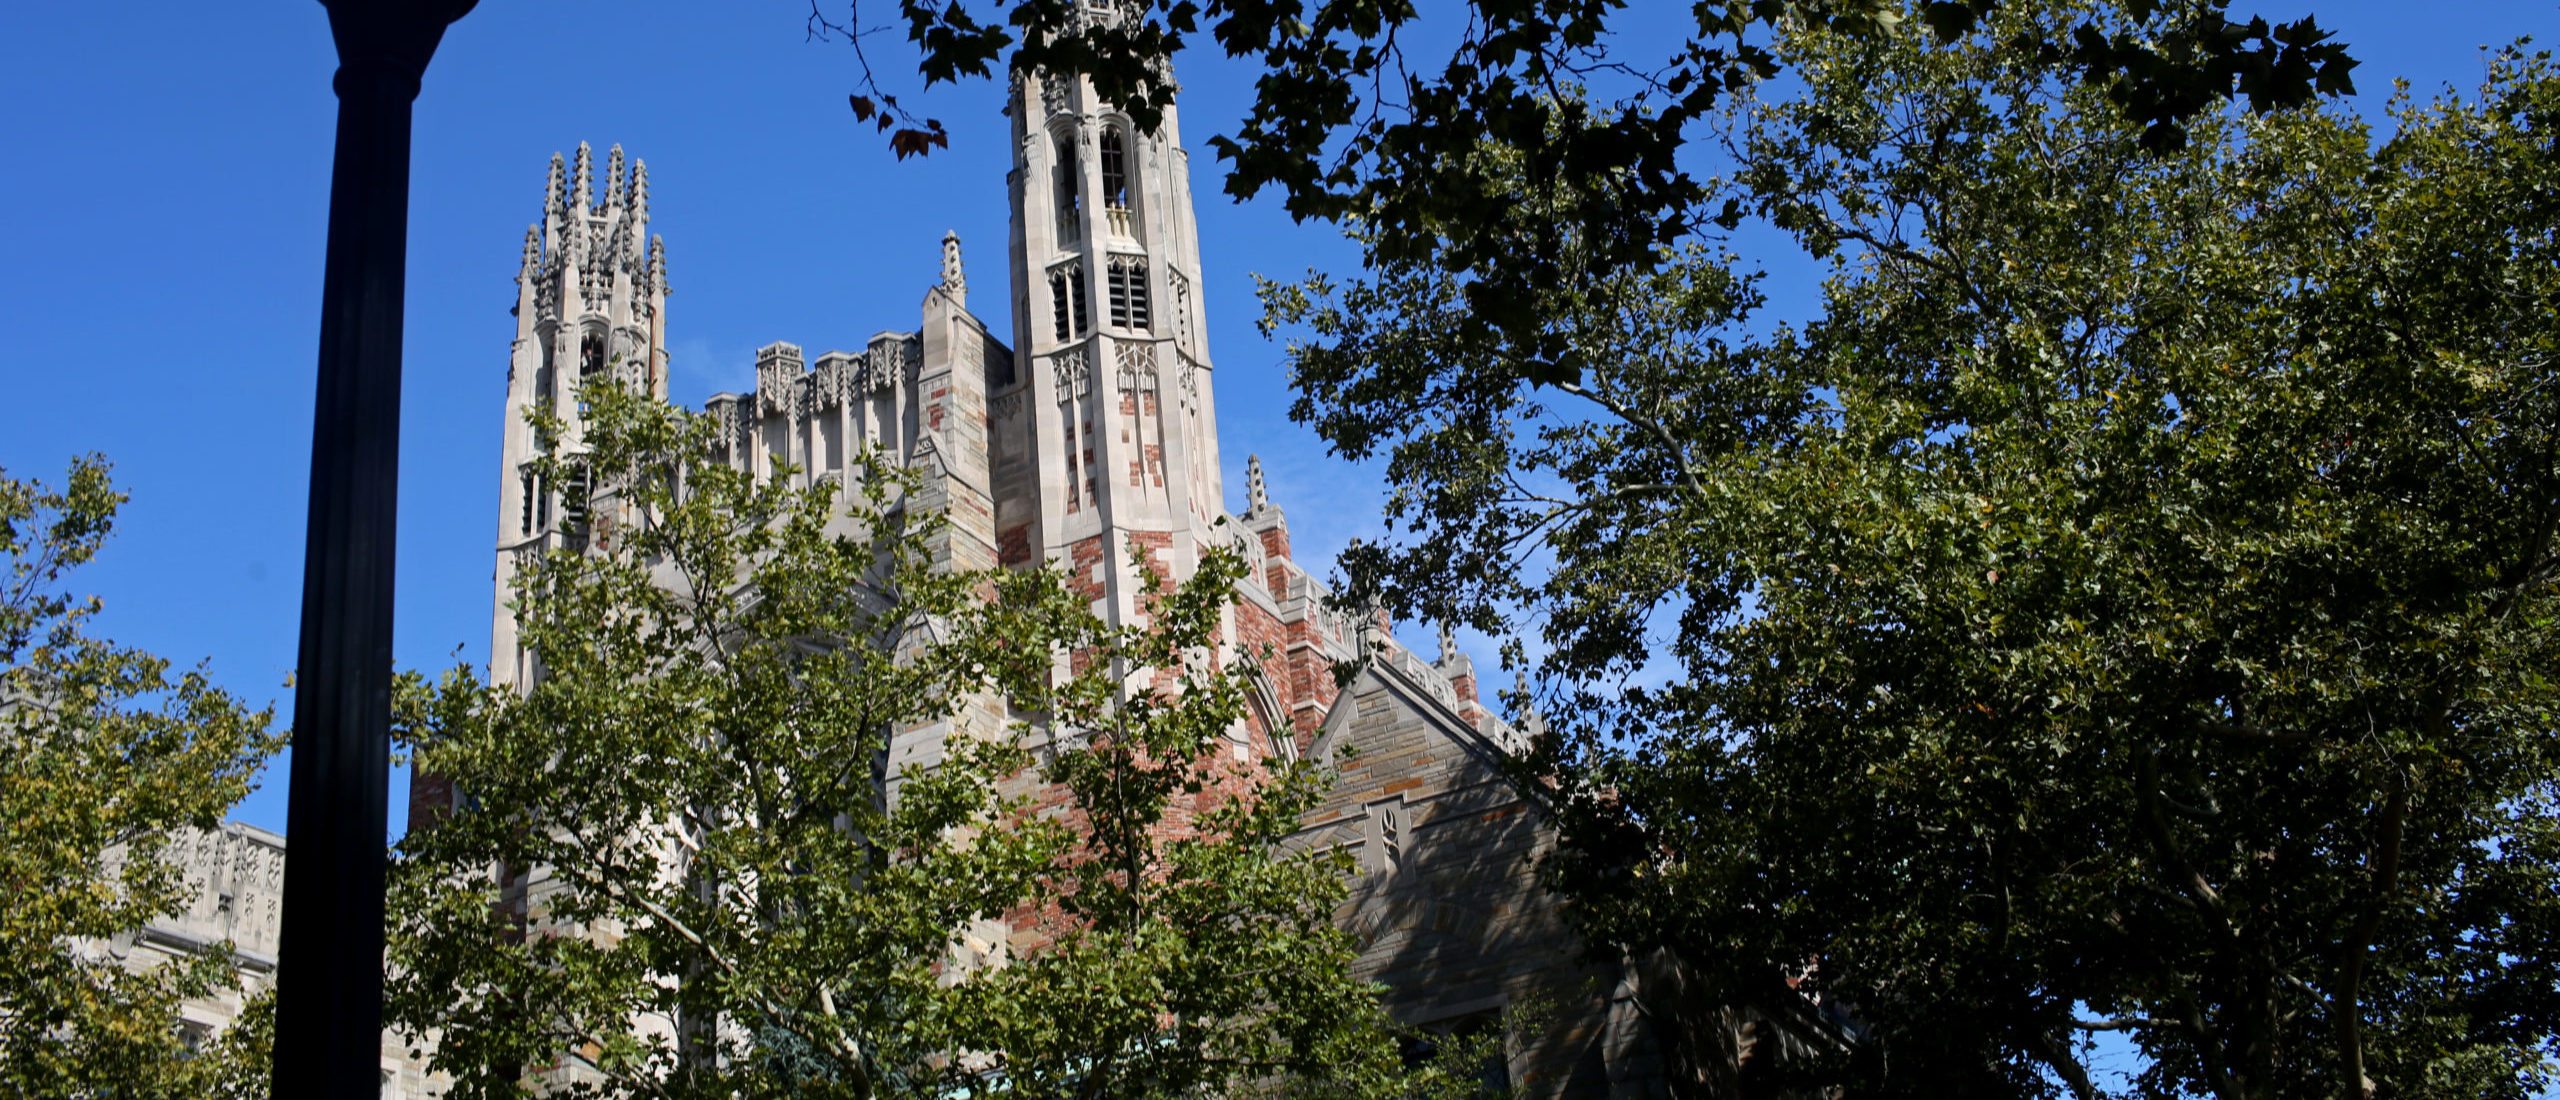 Ivy League Law School Will Pay Tuition For Low-Income Students